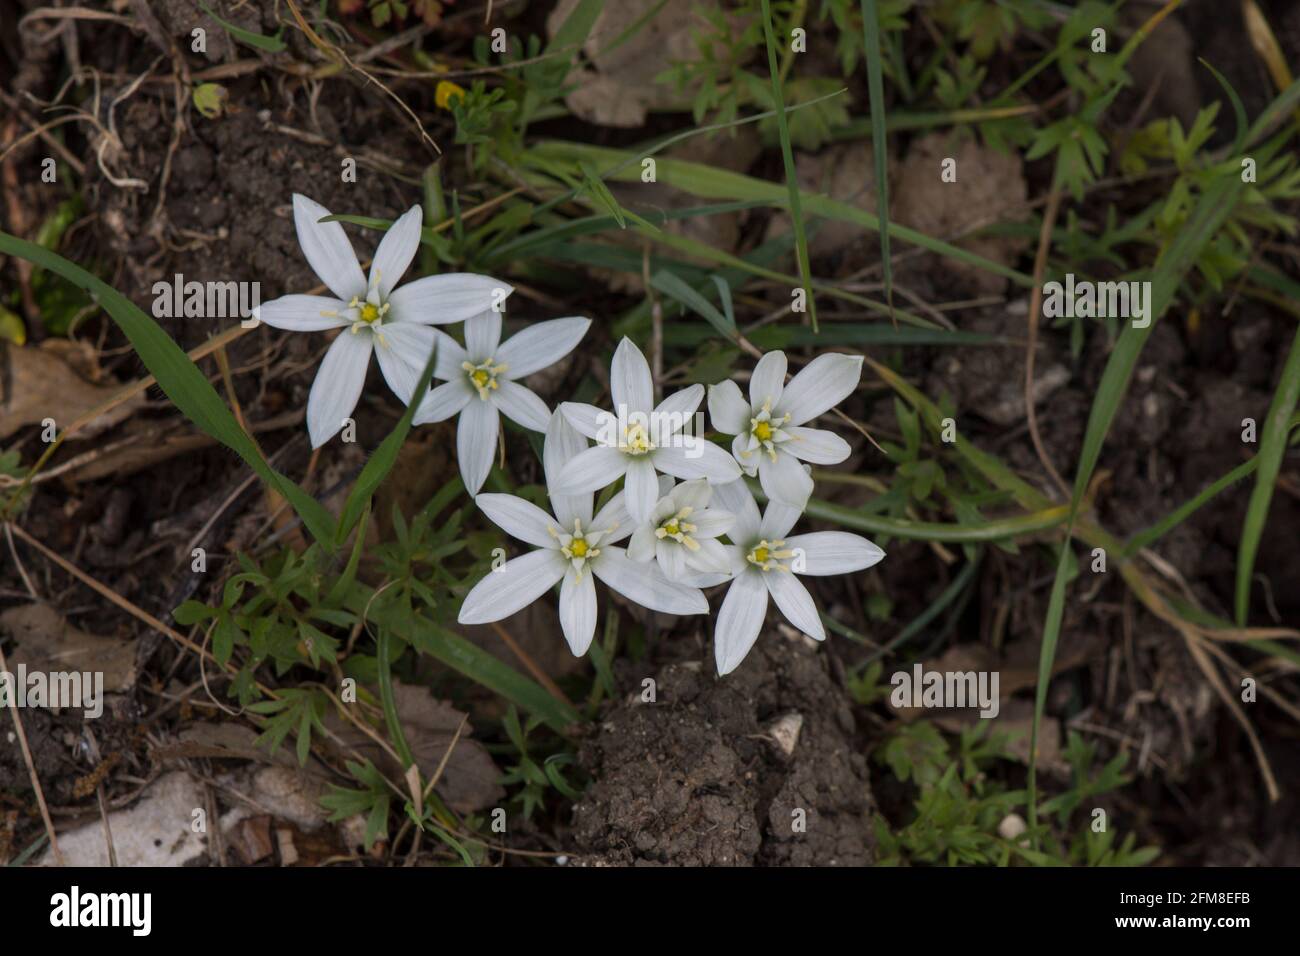 Garden star-of-Bethlehem, grass lily, Ornithogalum umbellatum, wildflower in Andalusia, Spain. Stock Photo